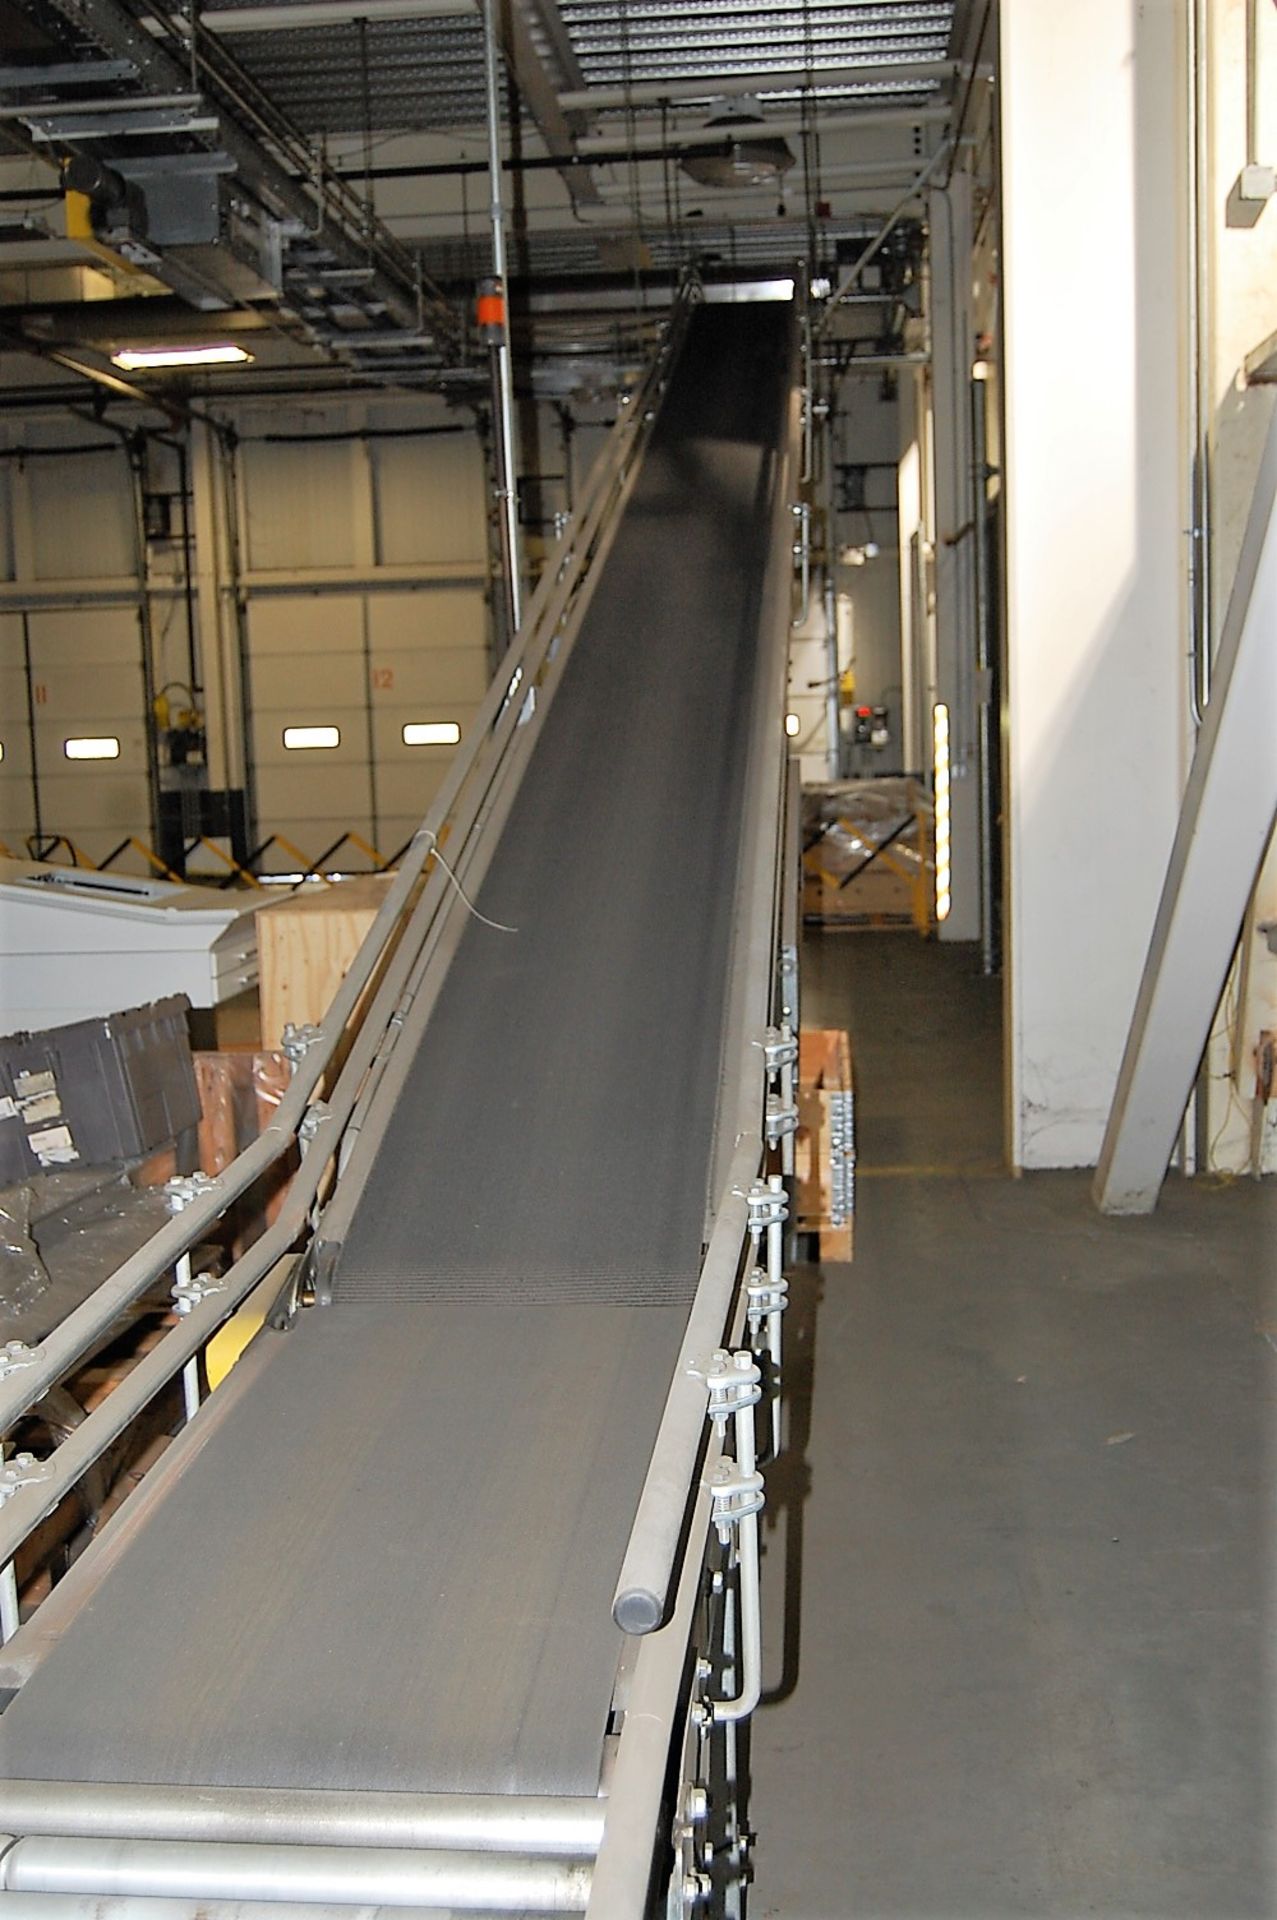 White Conveyors Model Remstar Series 2400 Vertical Carousel Storage/Inventory System - Image 33 of 49